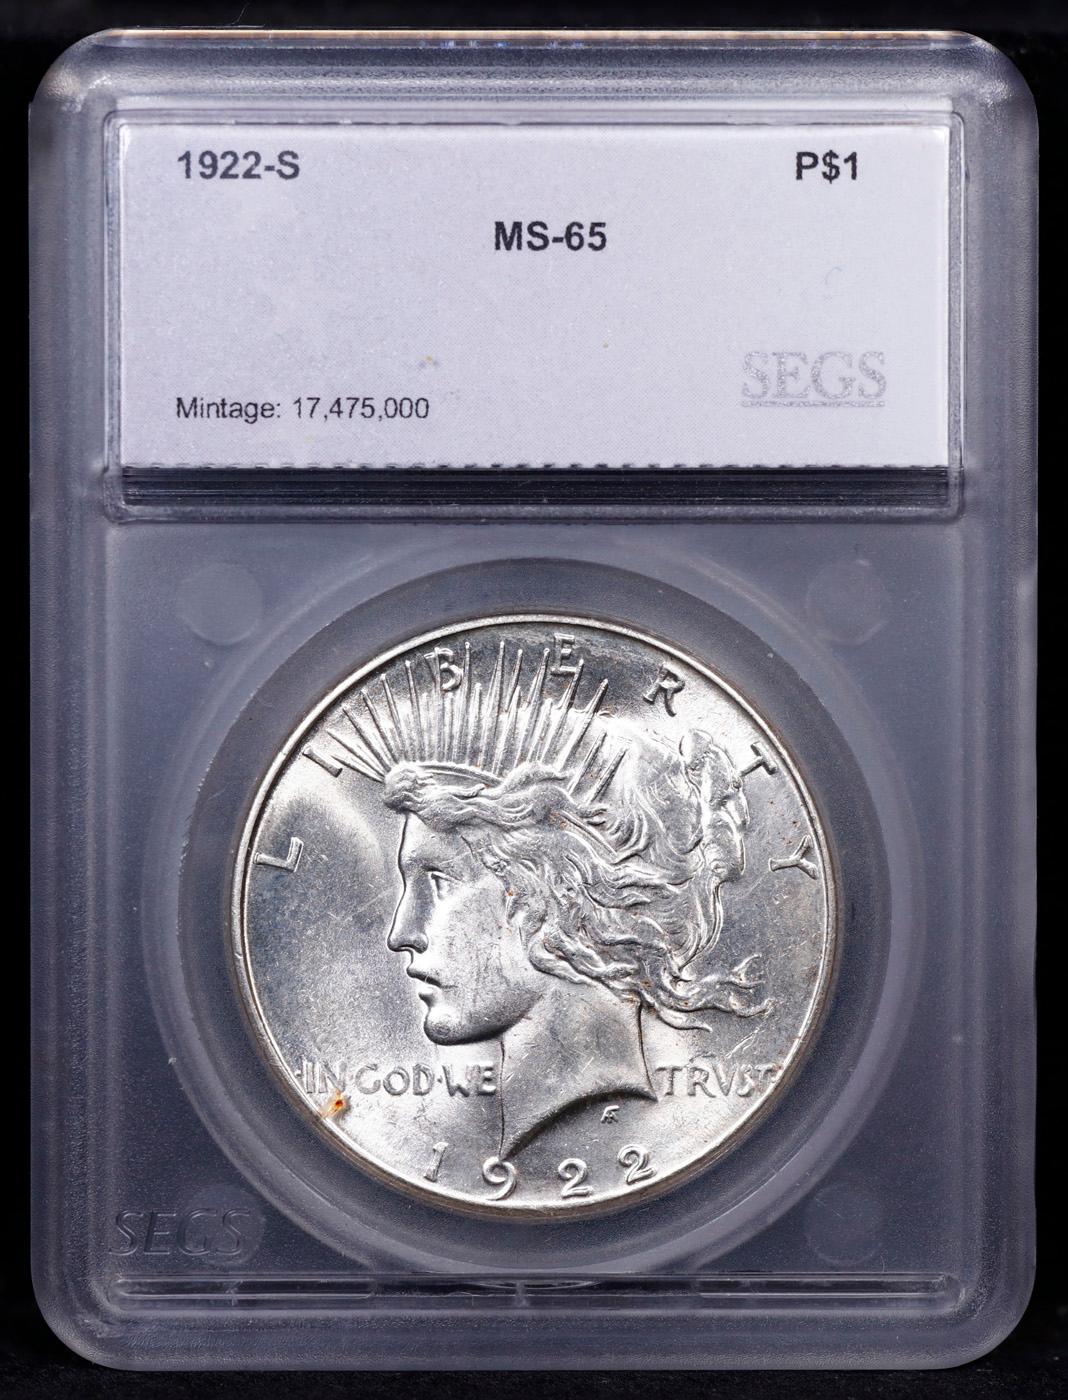 ***Auction Highlight*** 1922-s Peace Dollar $1 Graded ms65 BY SEGS (fc)